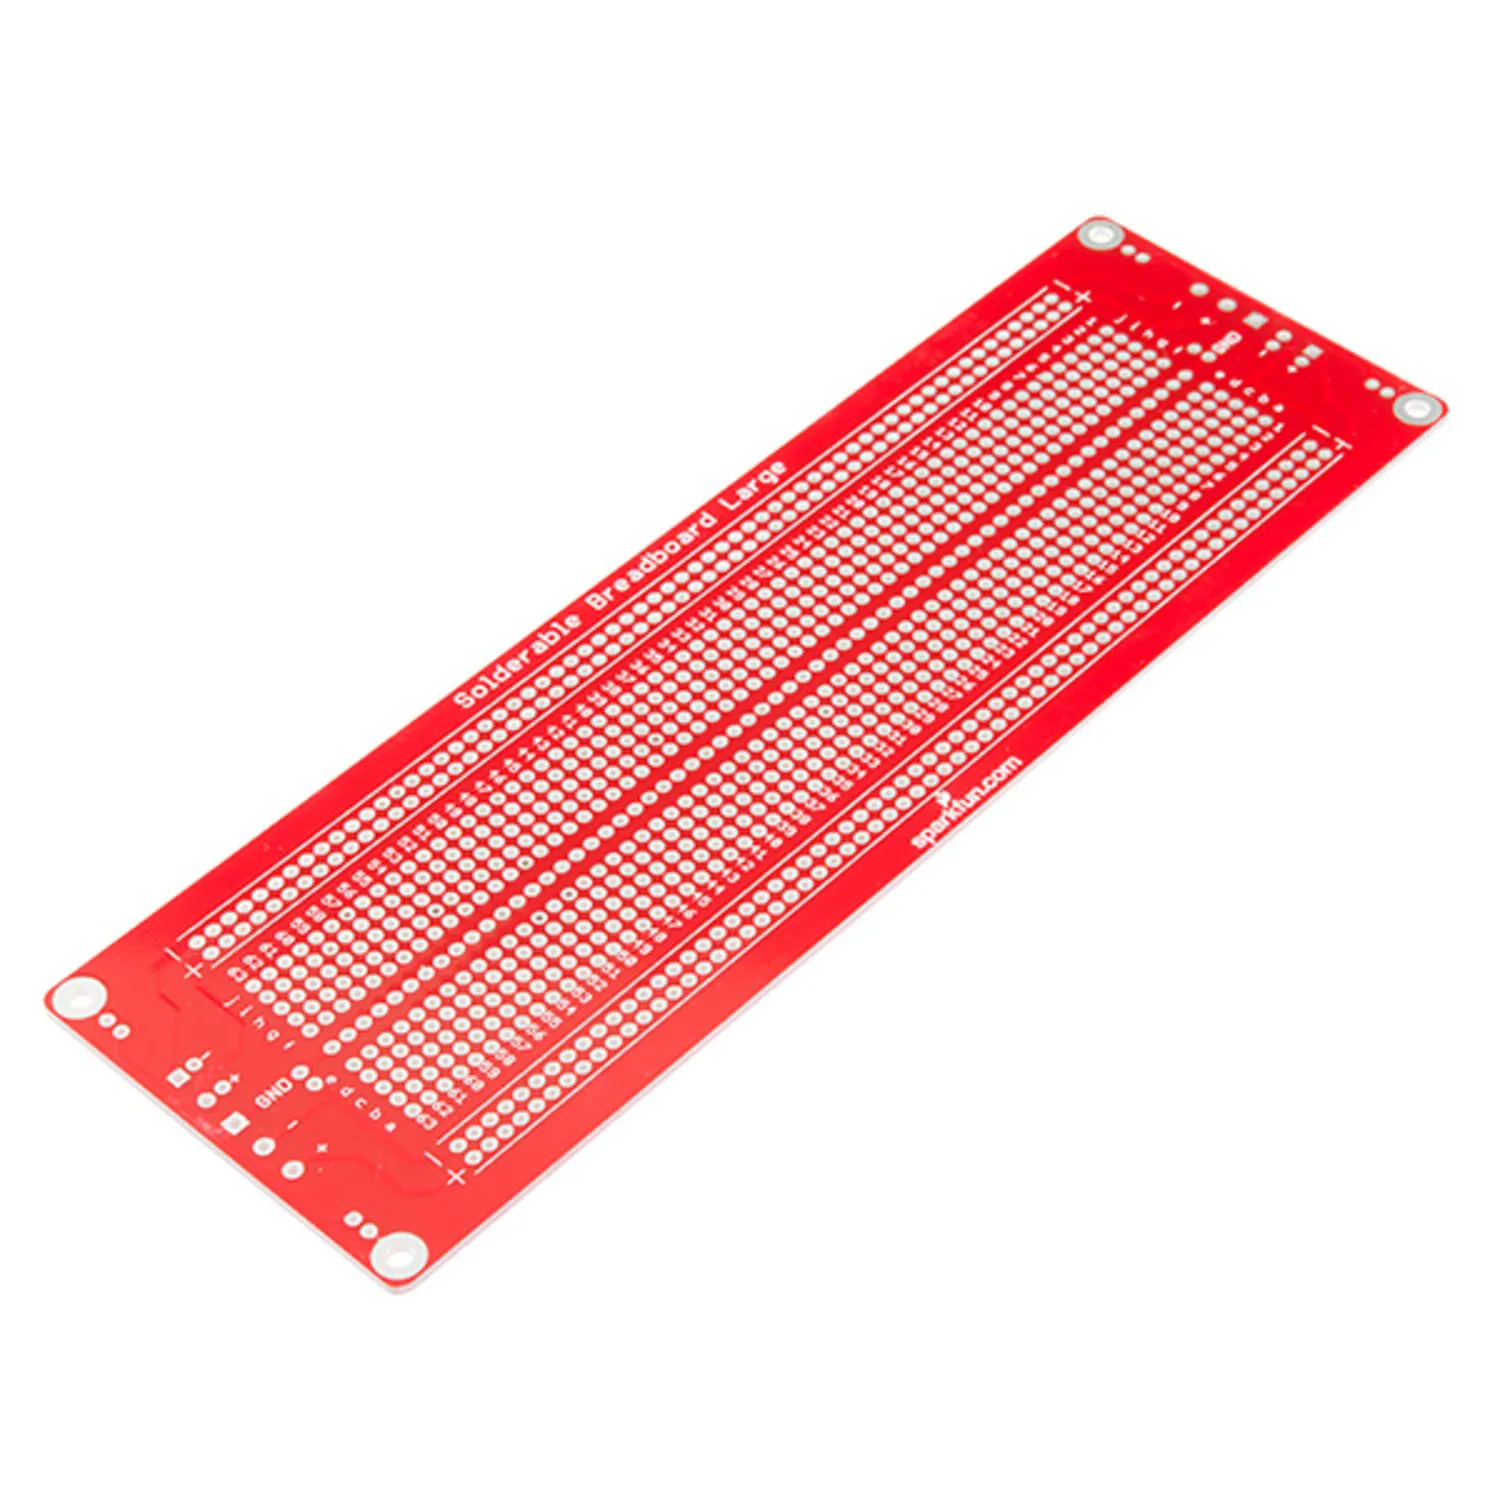 Photo of SparkFun Solder-able Breadboard - Large